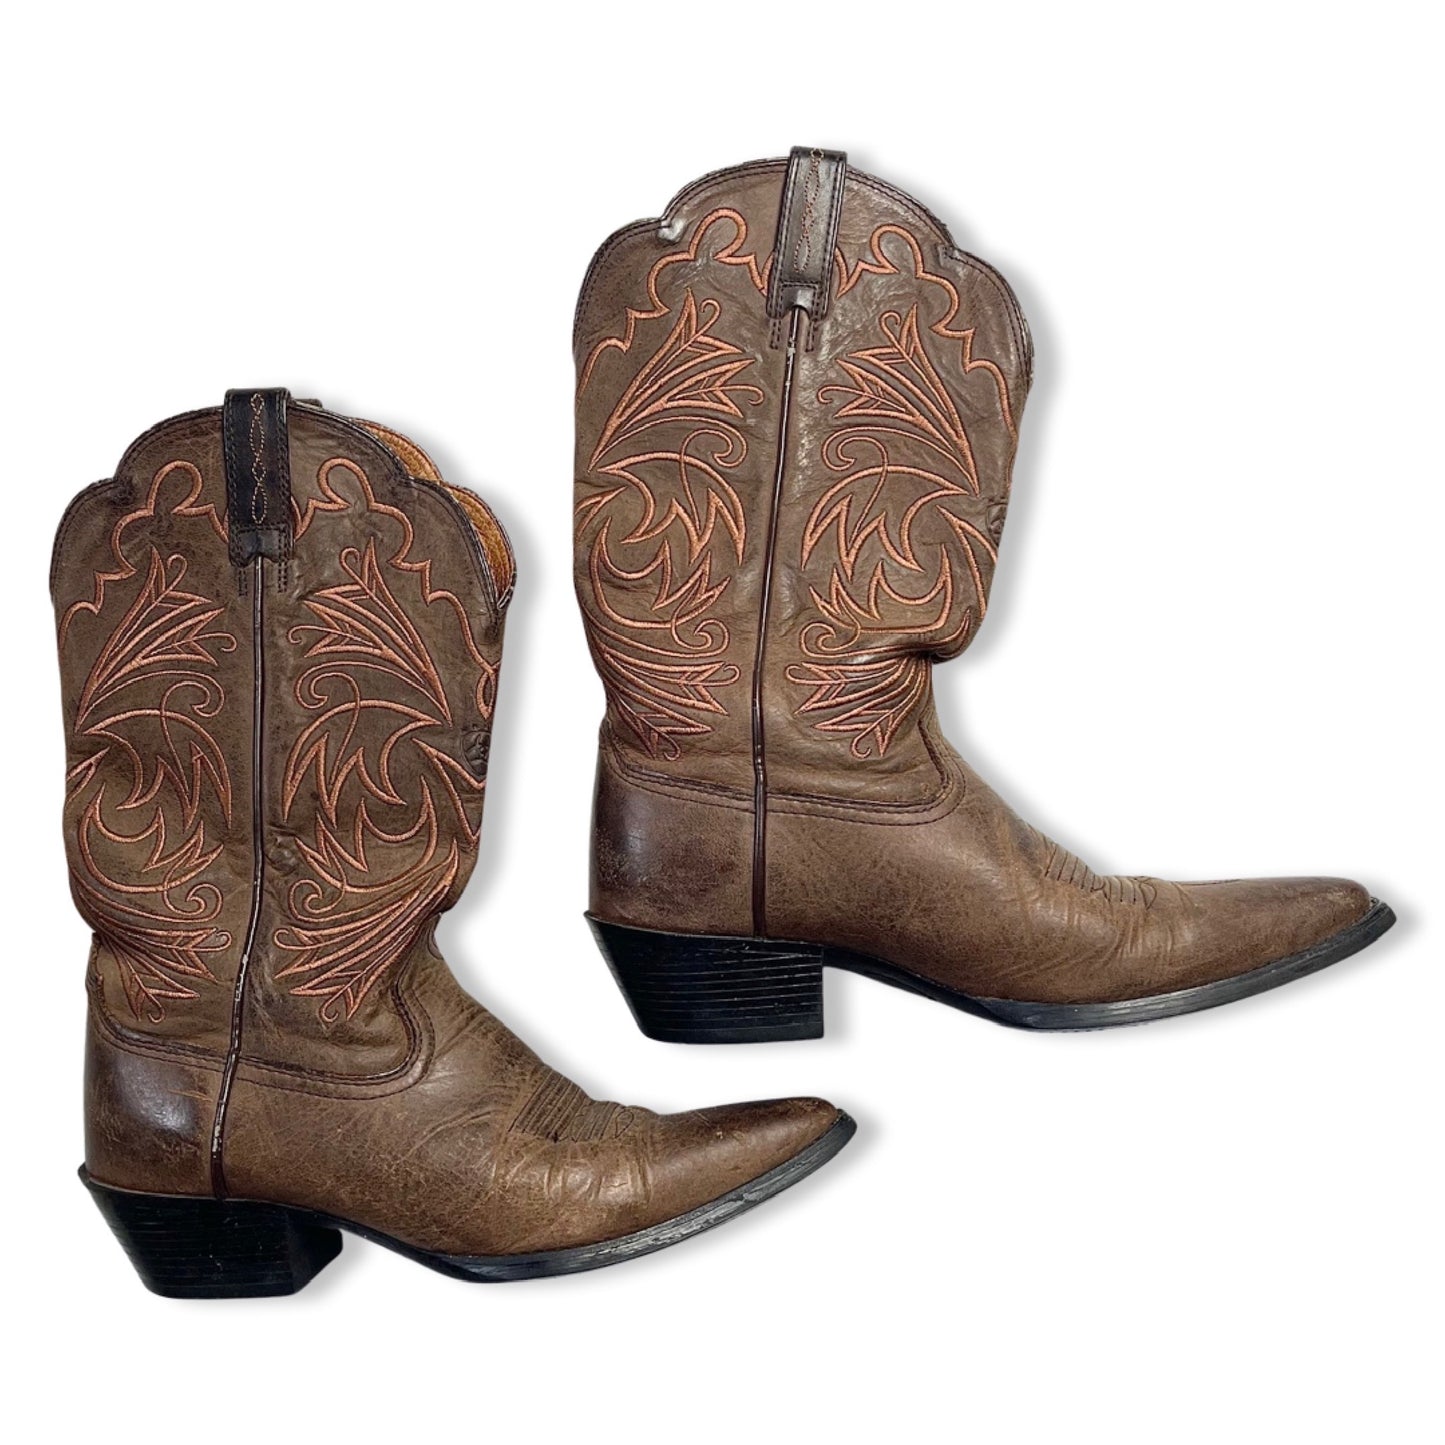 Ariat Women’s Cowgirl Boots